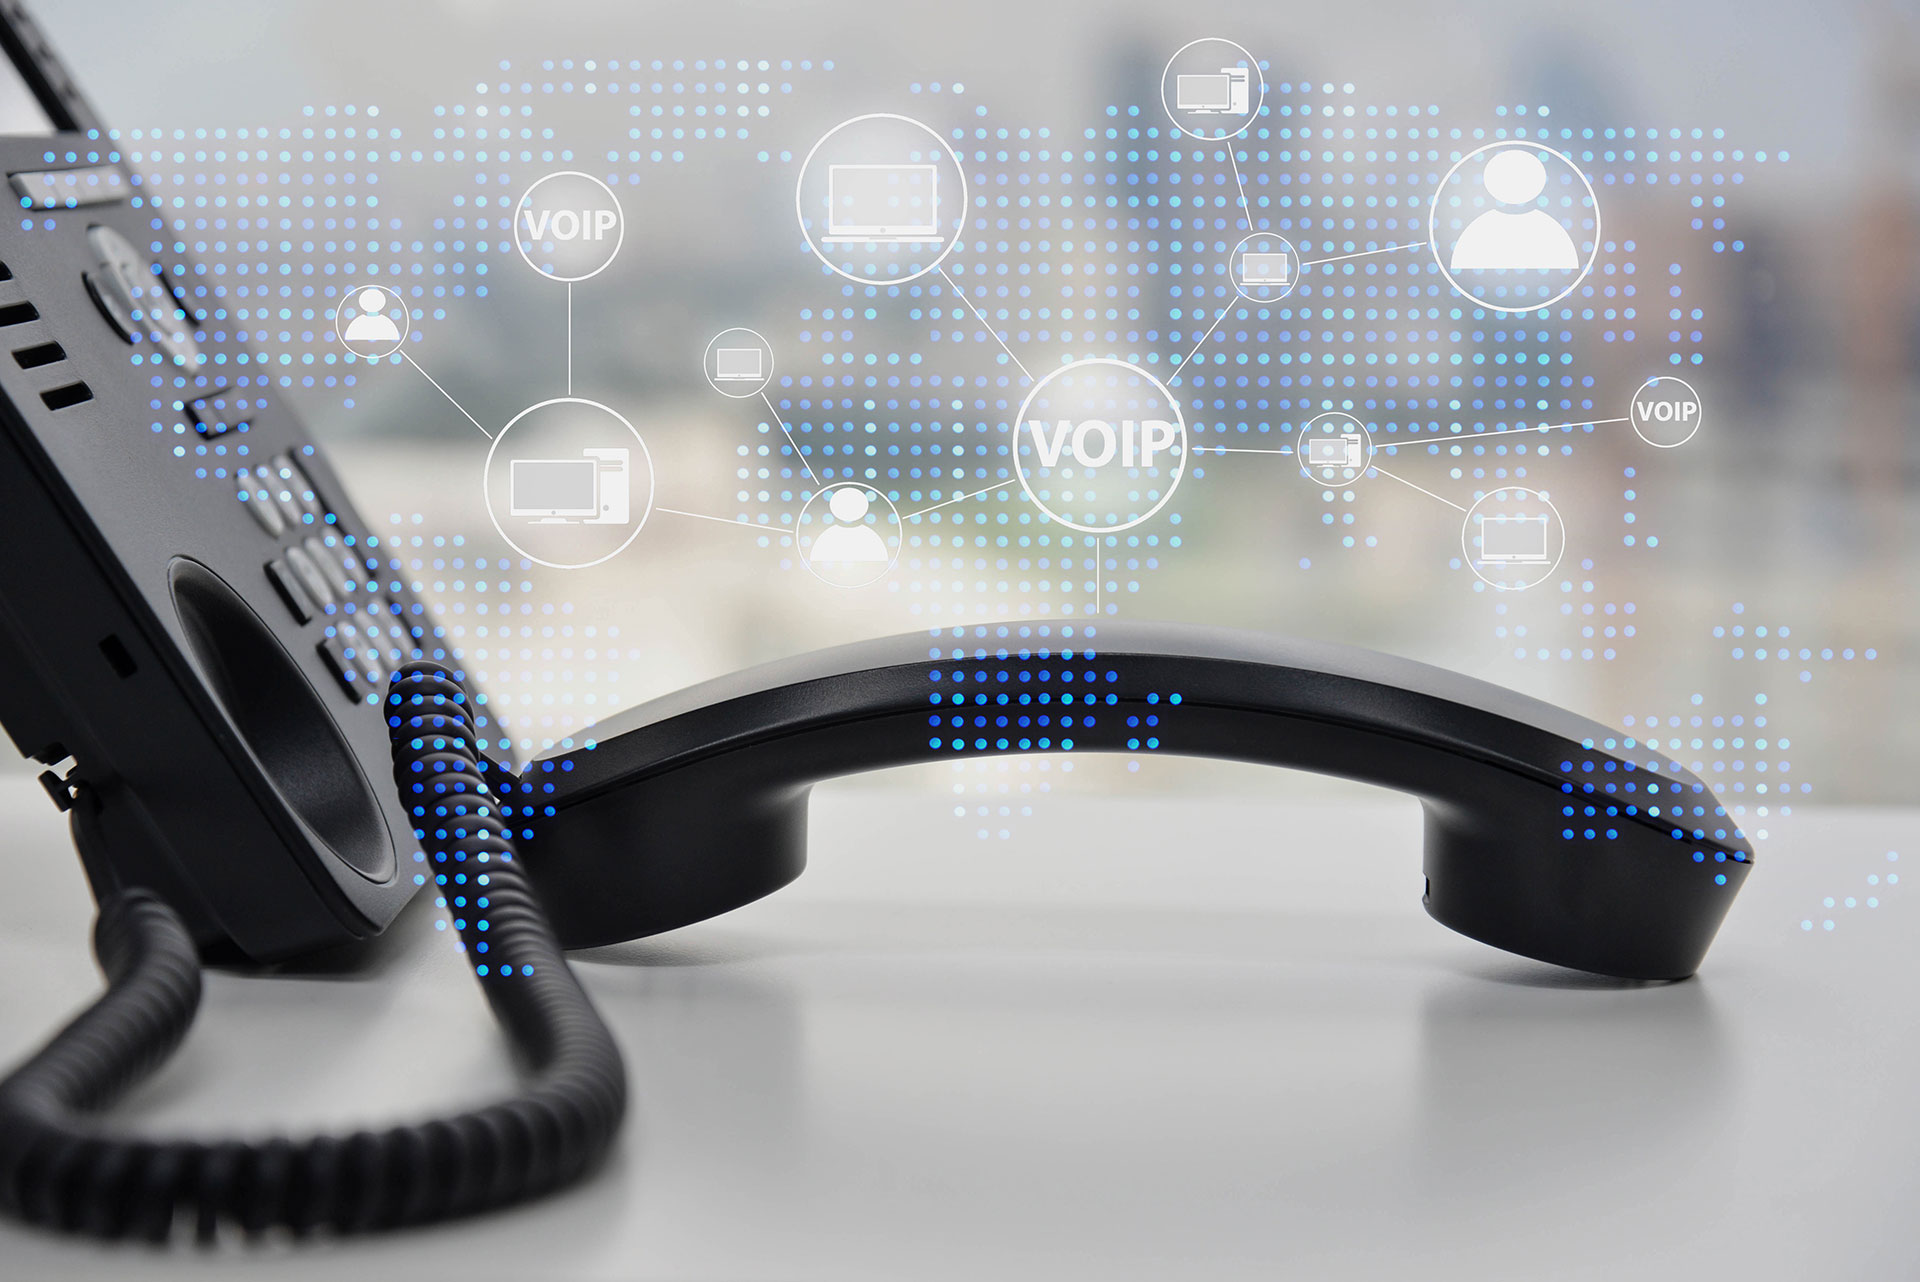 Break down of common VoIP acronyms